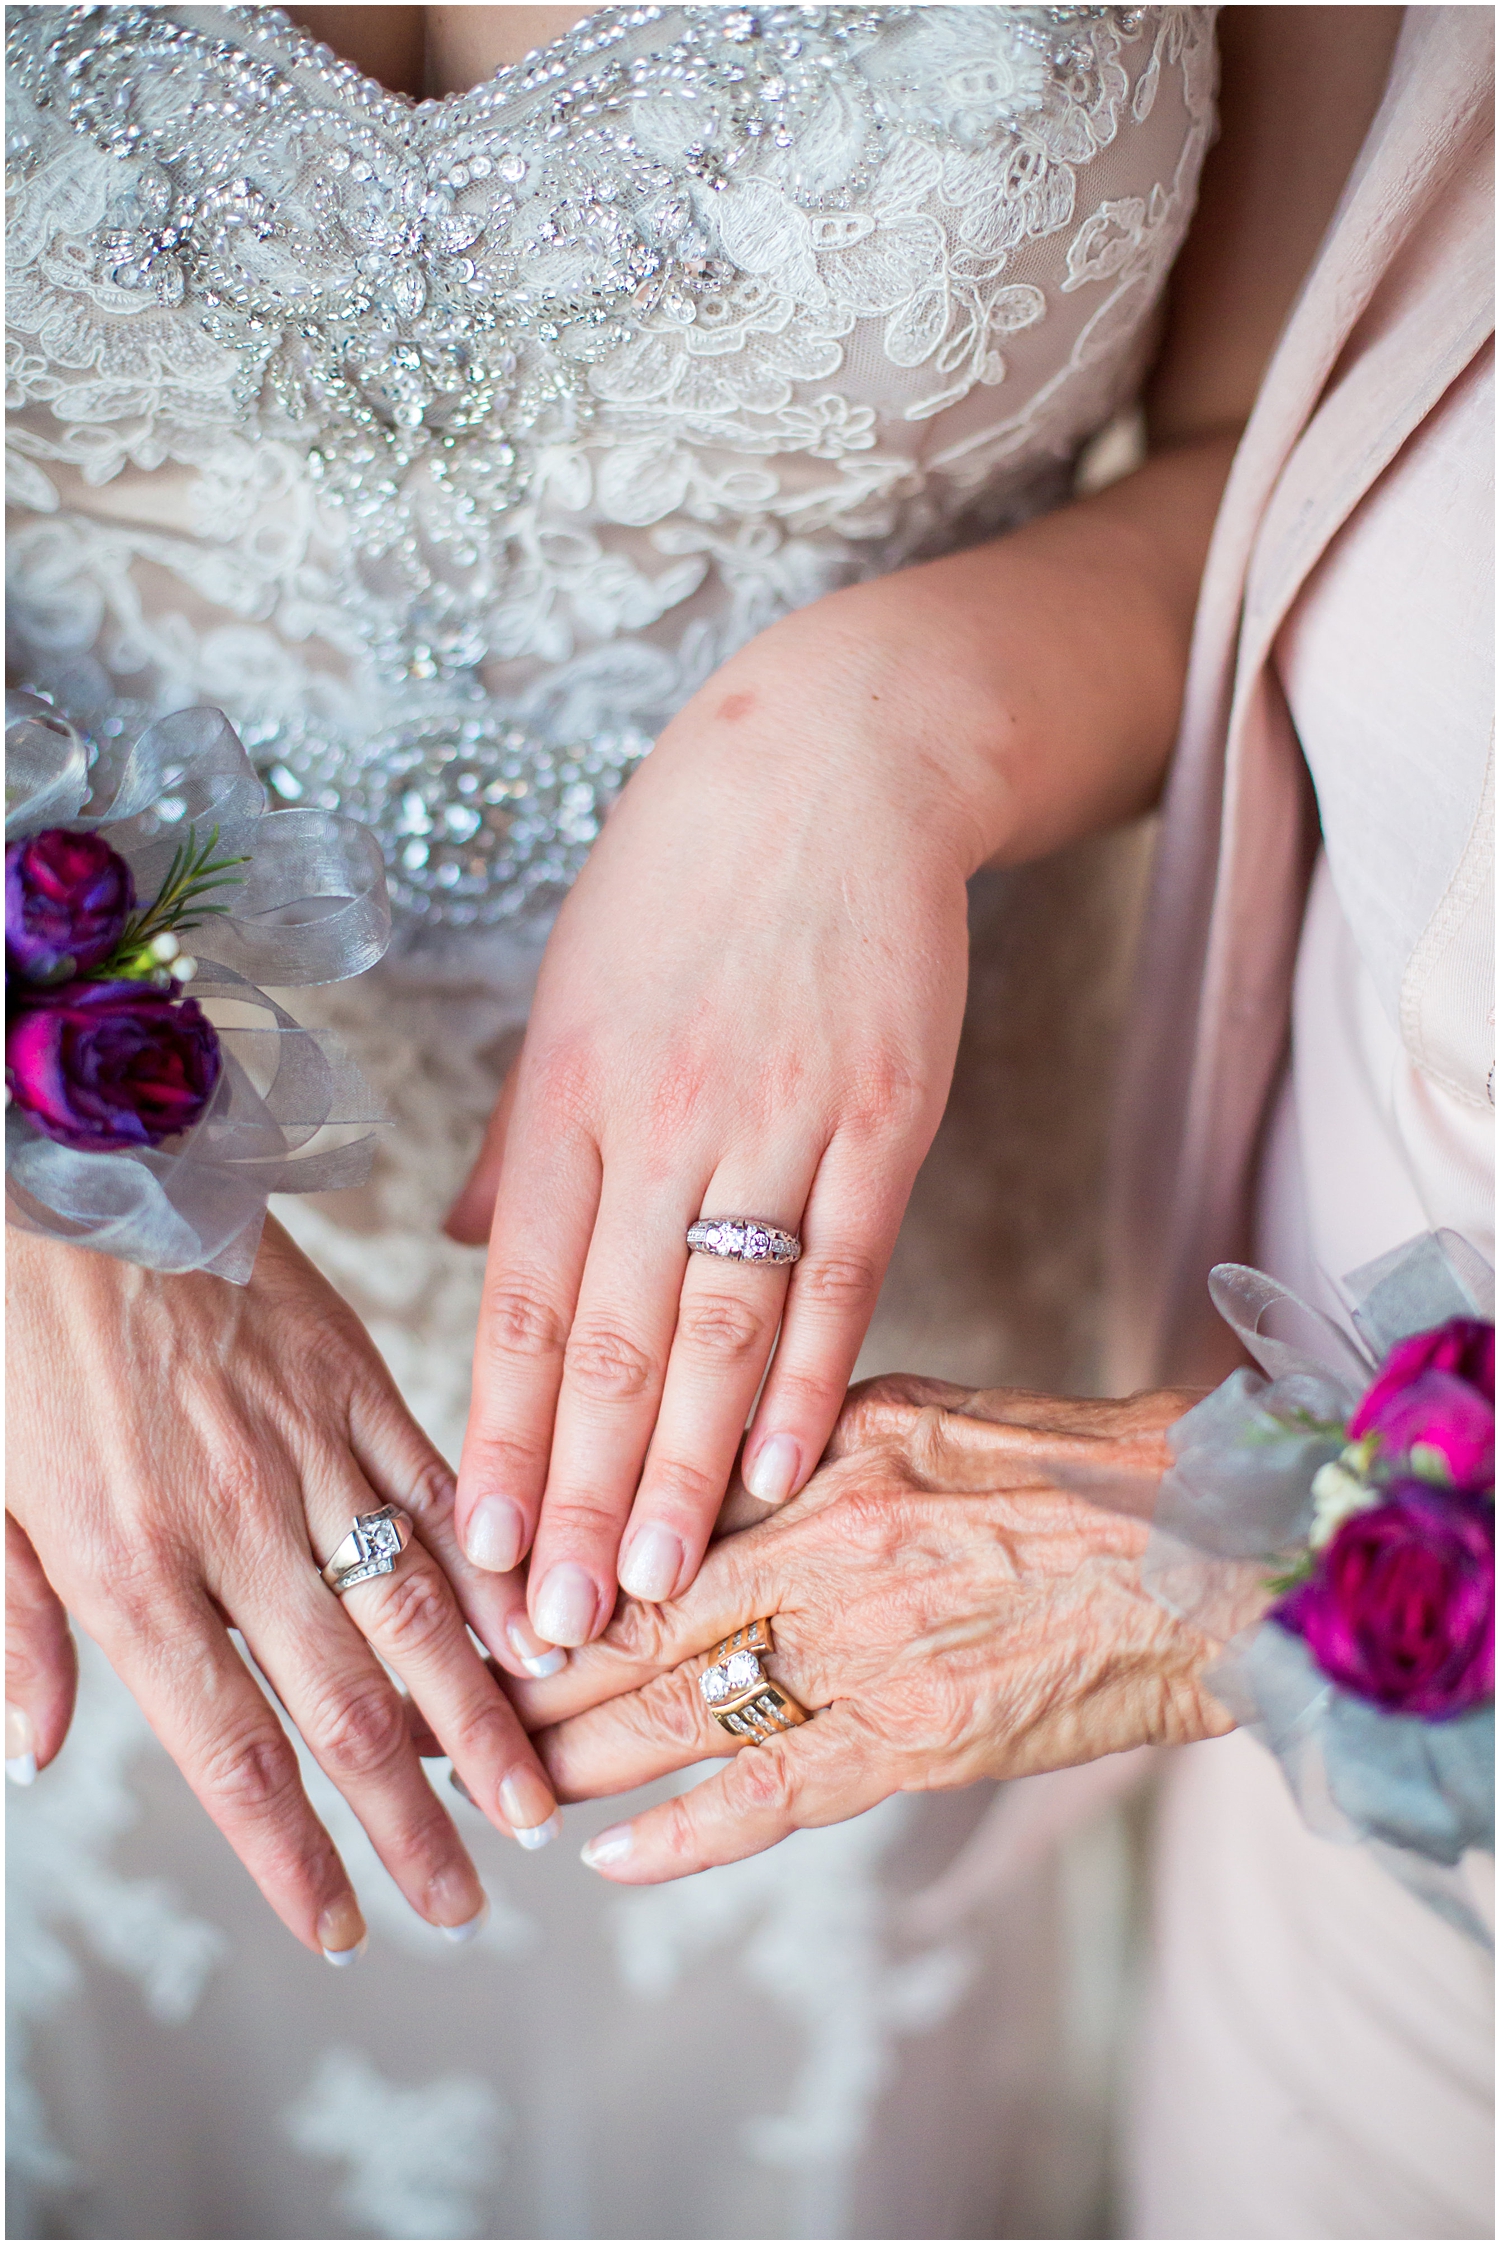 three generations of hands wearing wedding rings and bands together